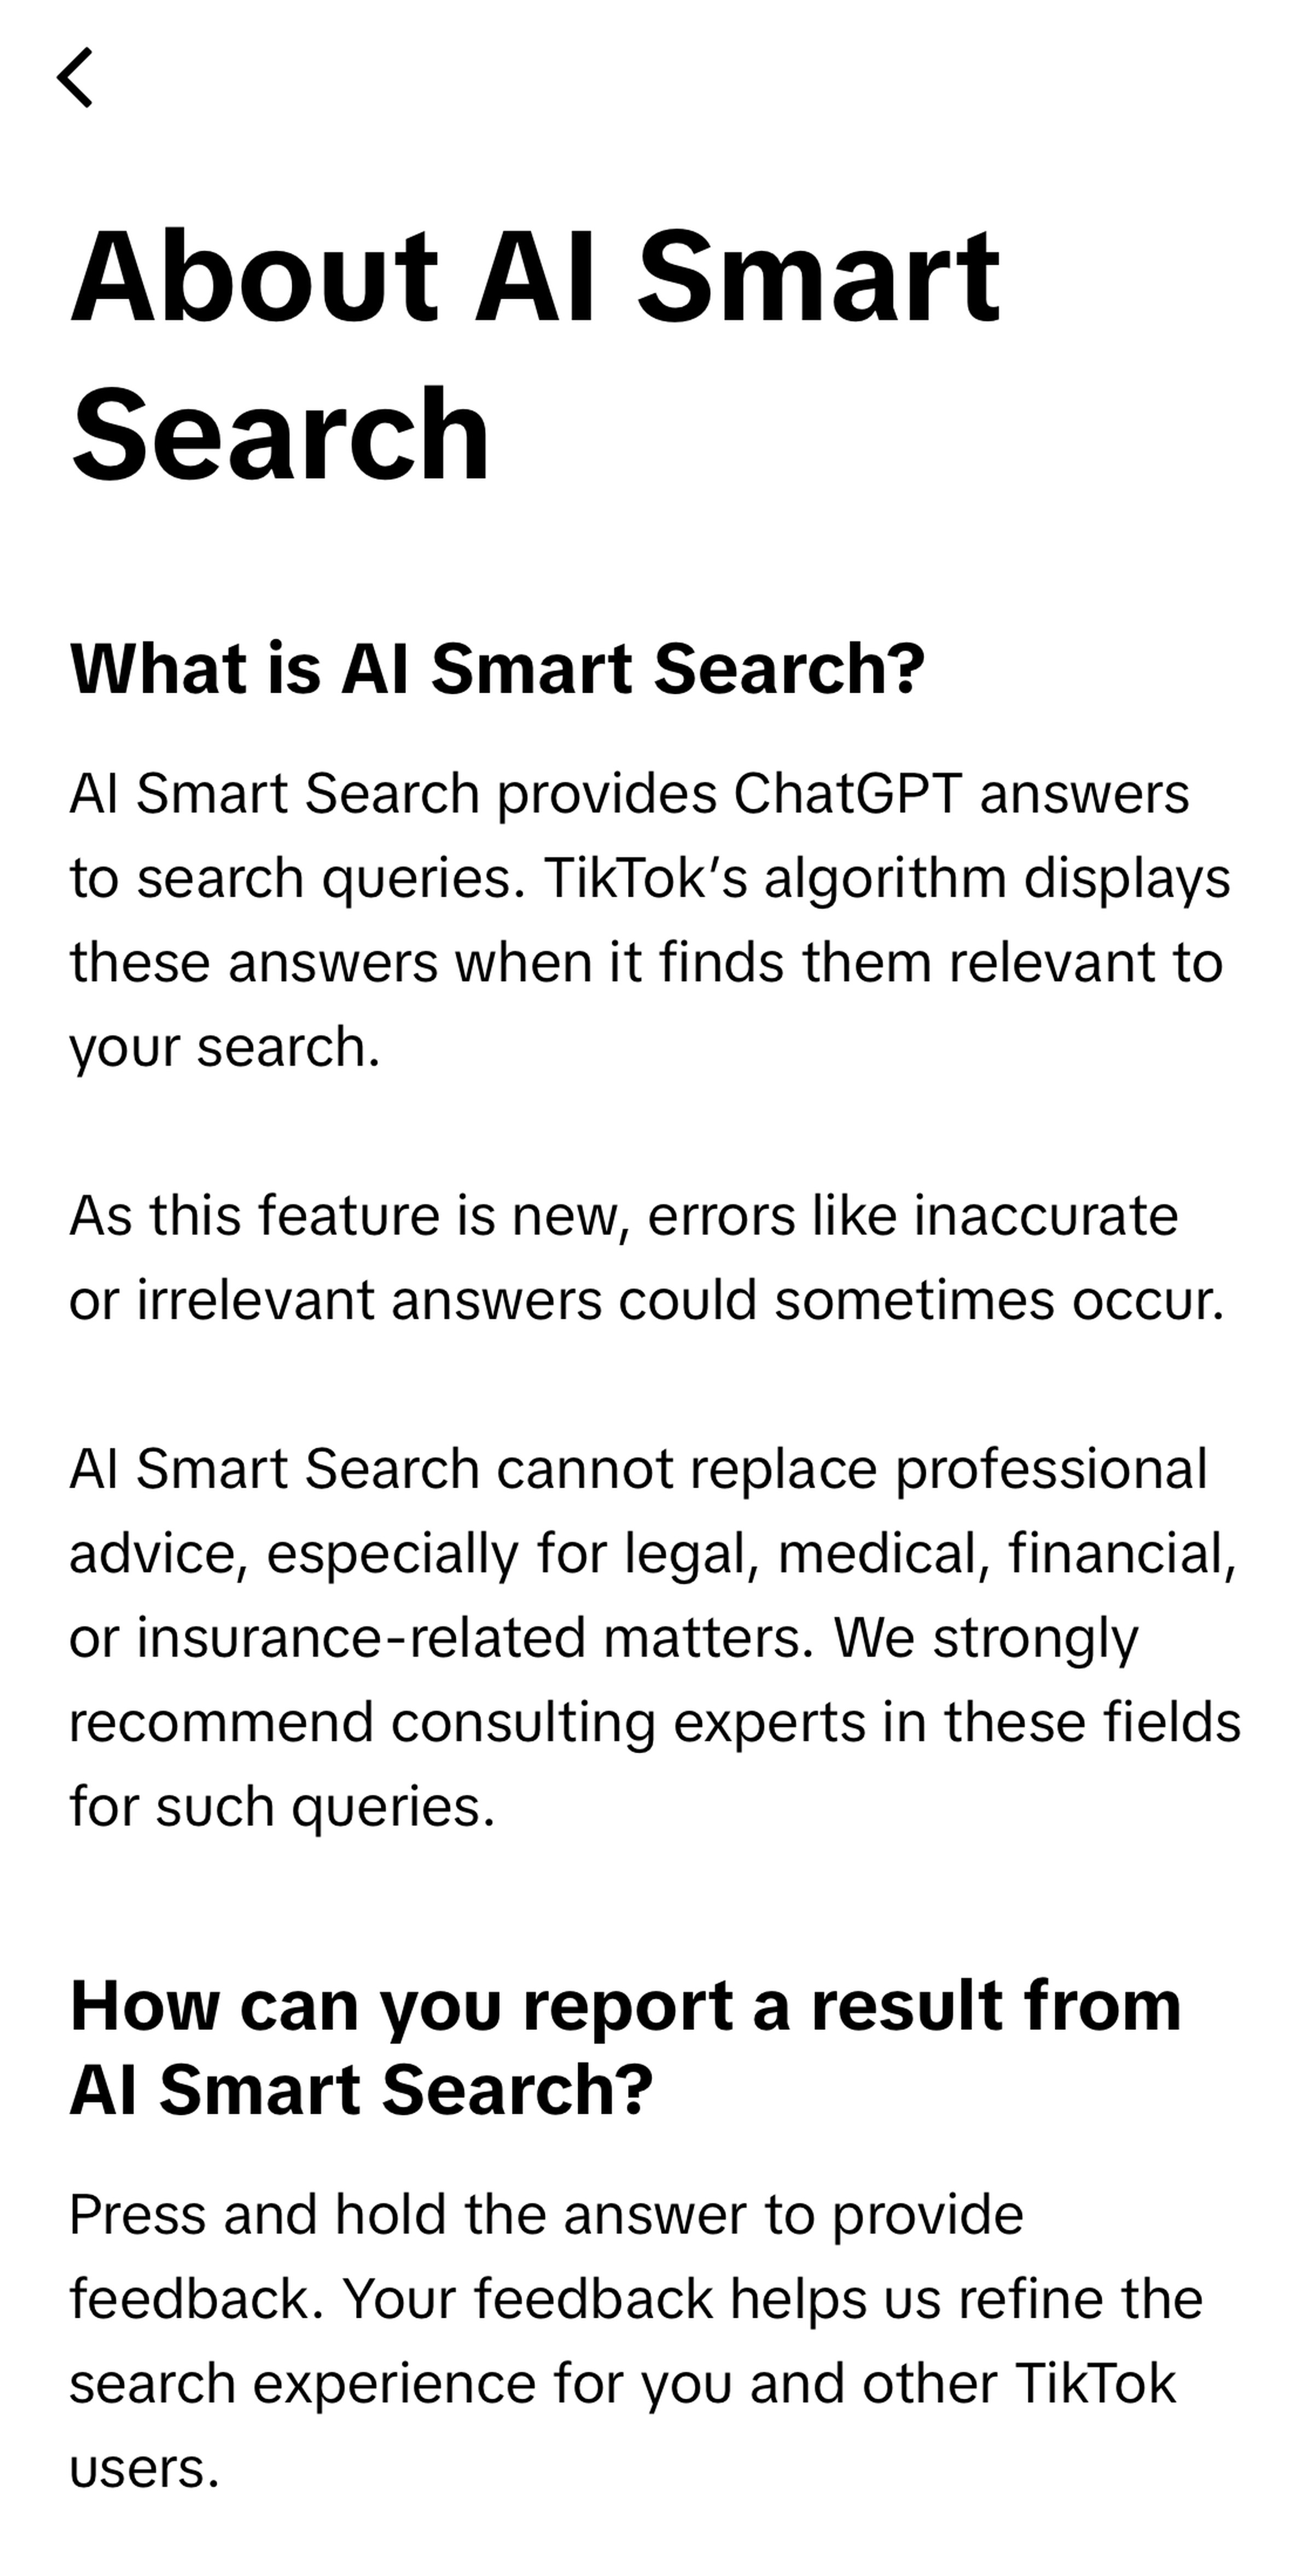 TikTok’s AI search results page say the material is from ChatGPT and the algorithm displays the answers when they are relevant to a search.